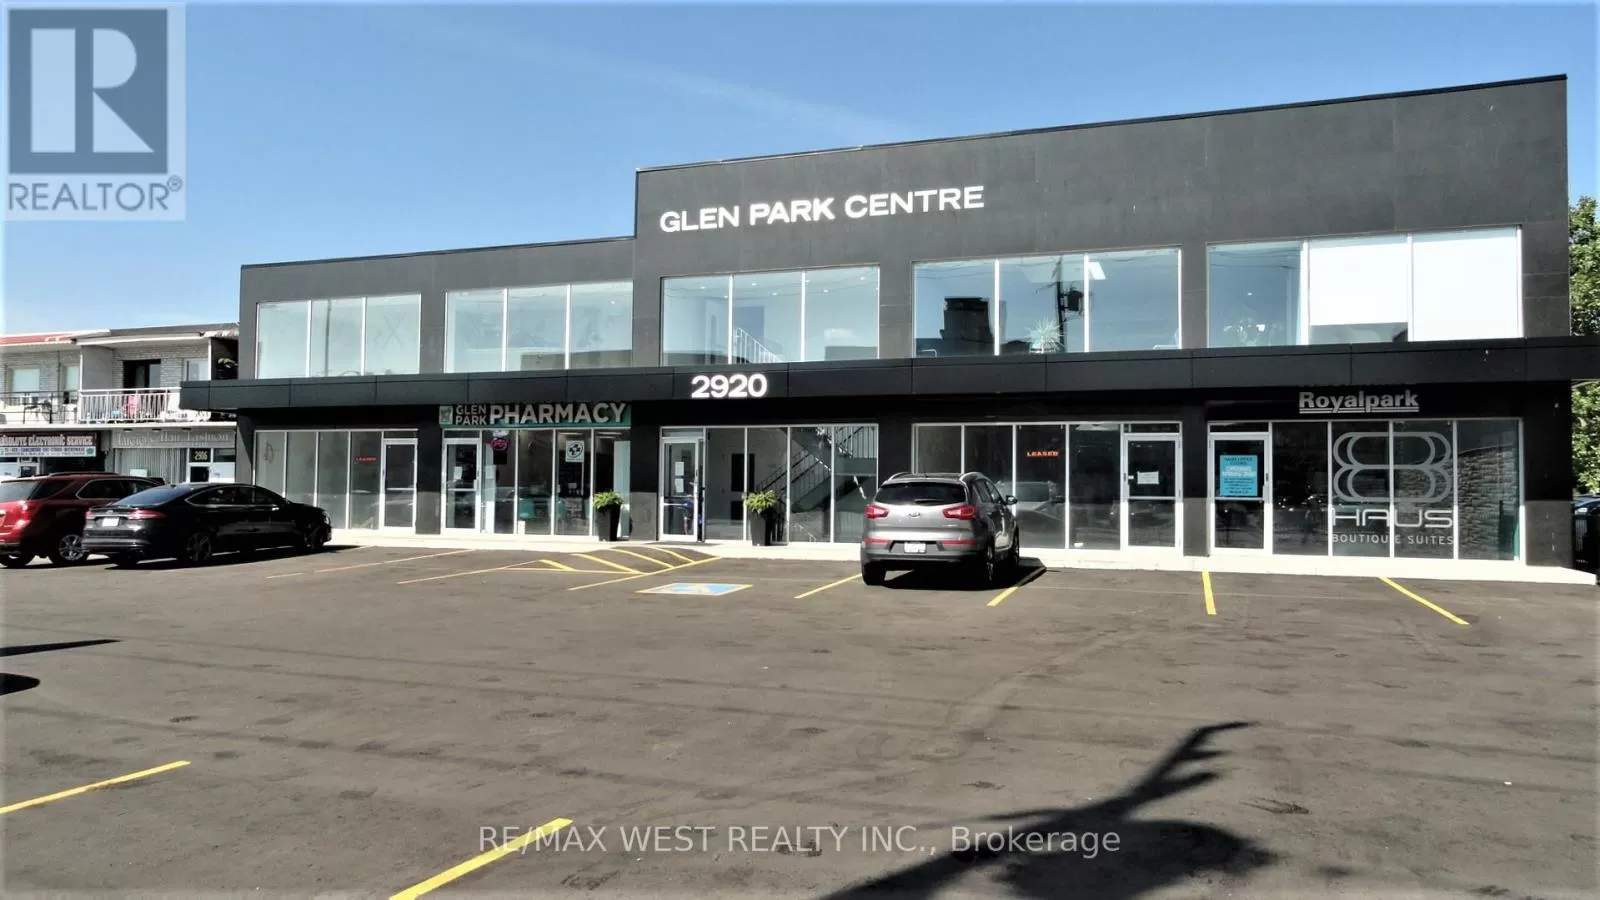 Offices for rent: Ll1 - 2920 Dufferin Street, Toronto, Ontario M6B 3S8